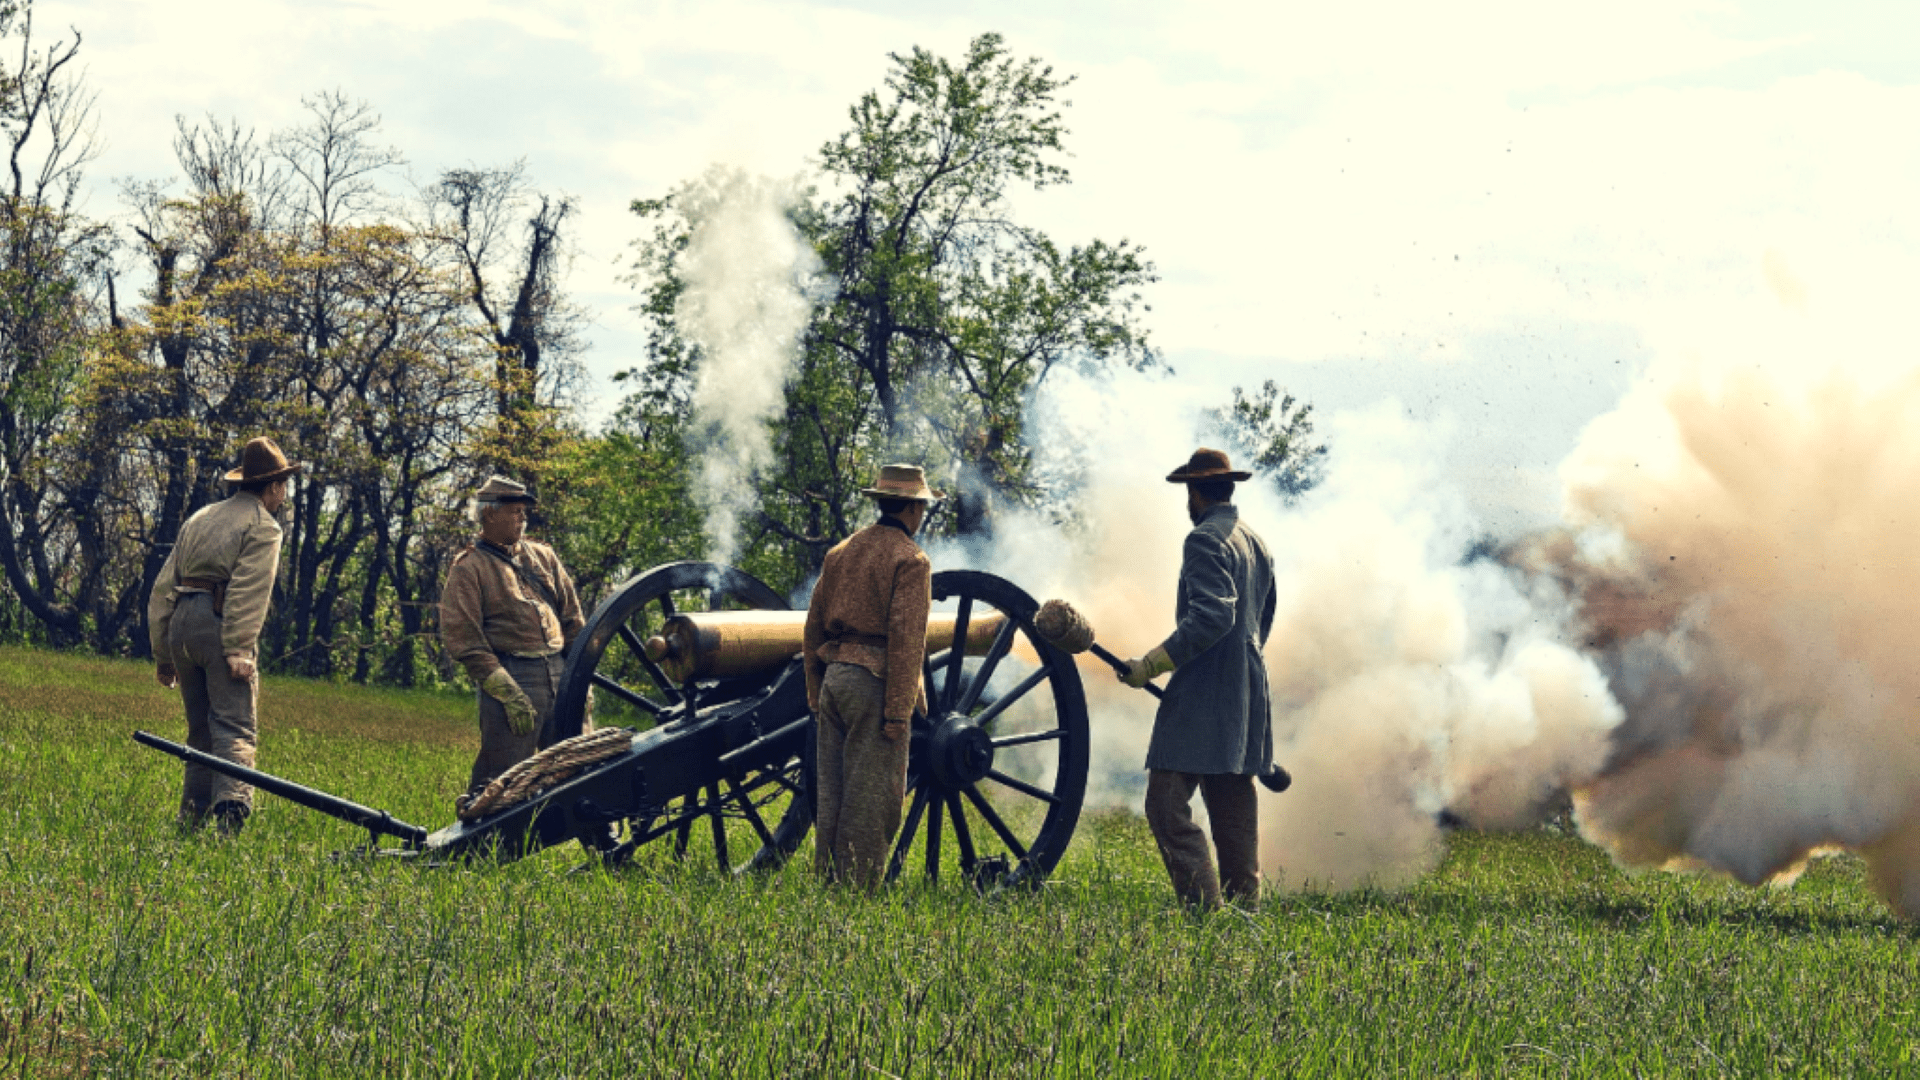 What should libertarians think about the Civil War?